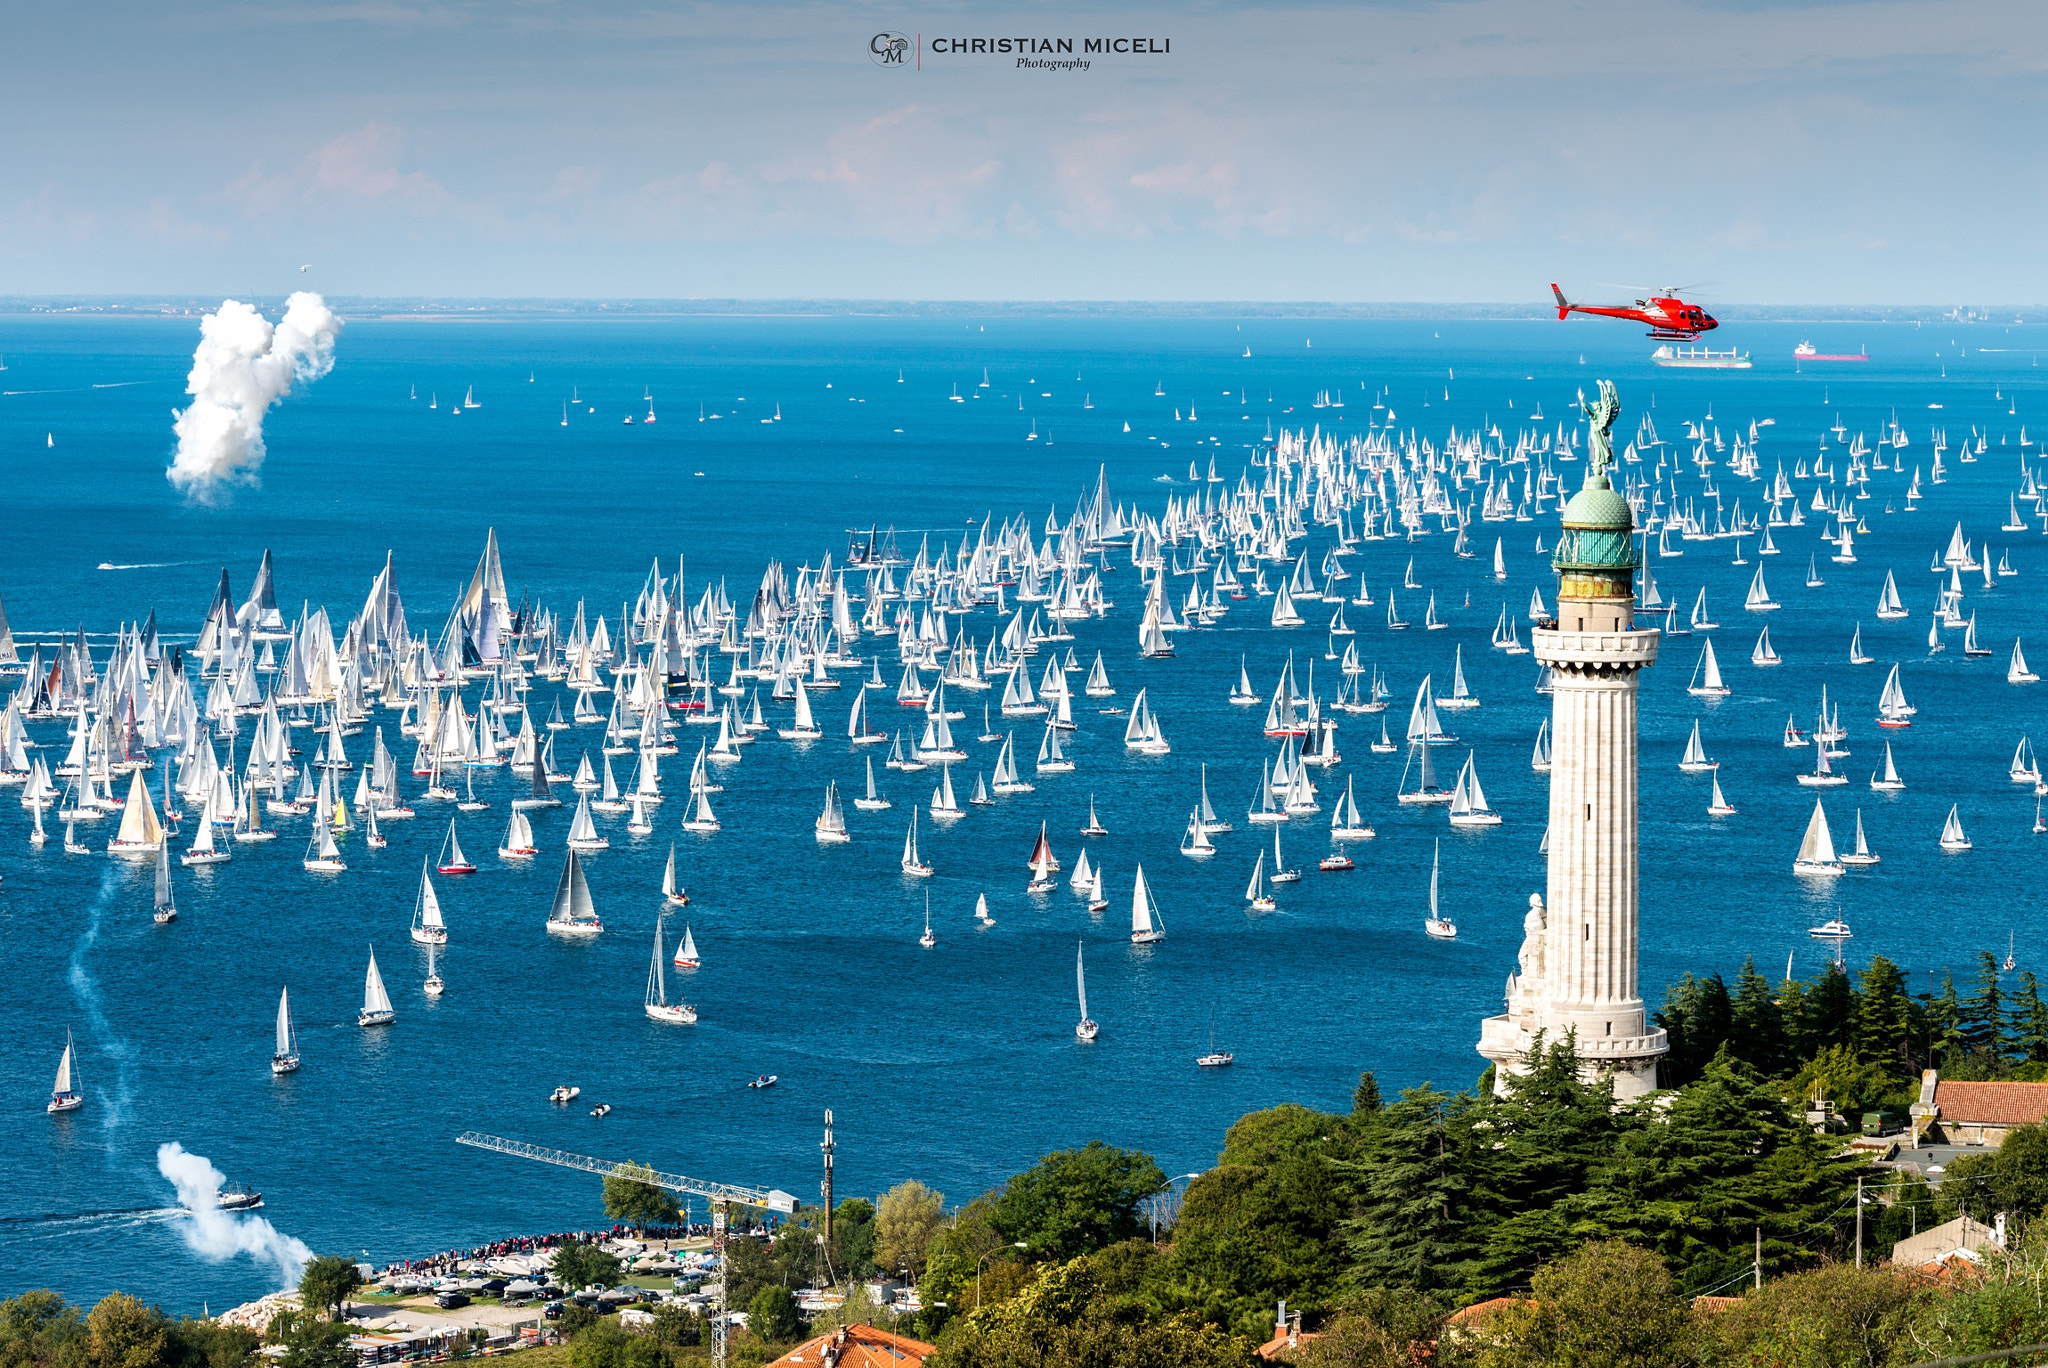 Nikon D800E sample photo. Start barcolana 2016 trieste italy . it's a race about 2000 boat and yacht. photography